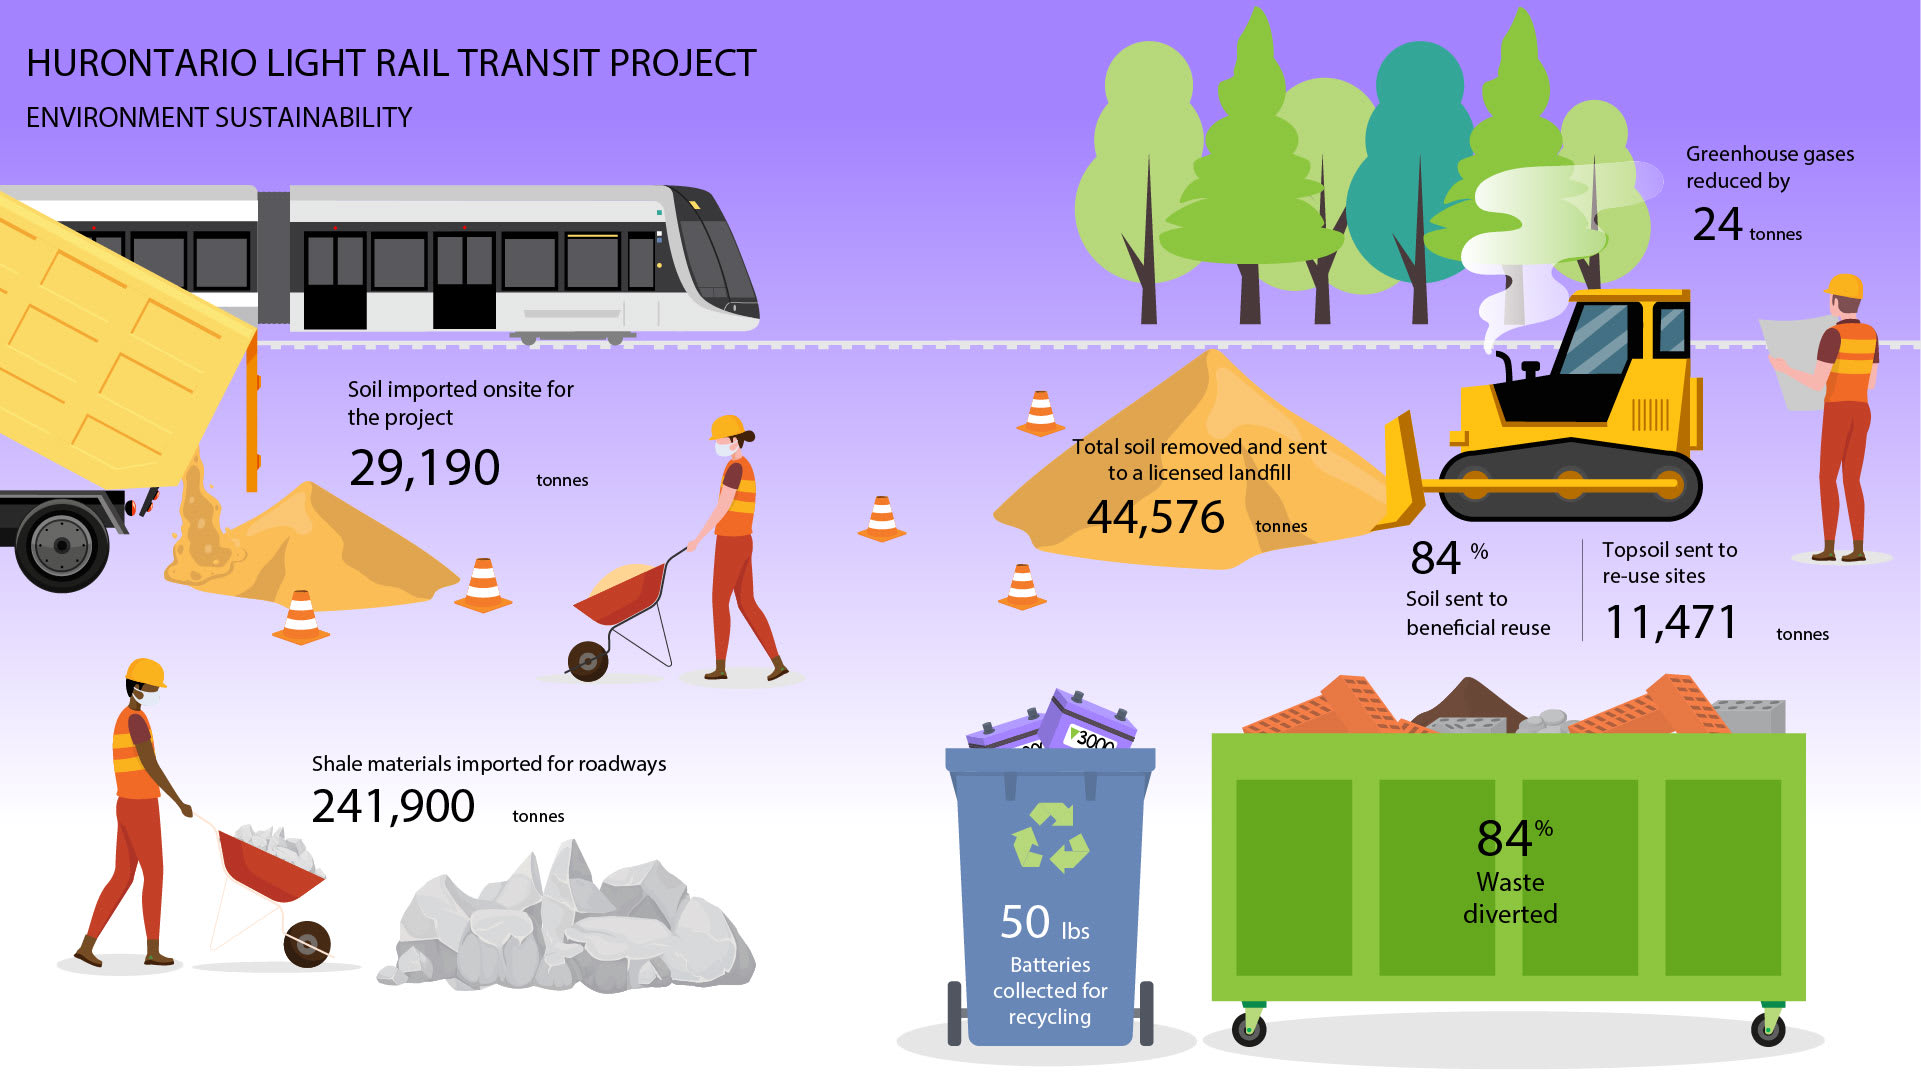 graphic depicting environmental sustainability efforts done on the Hurontario LRT project